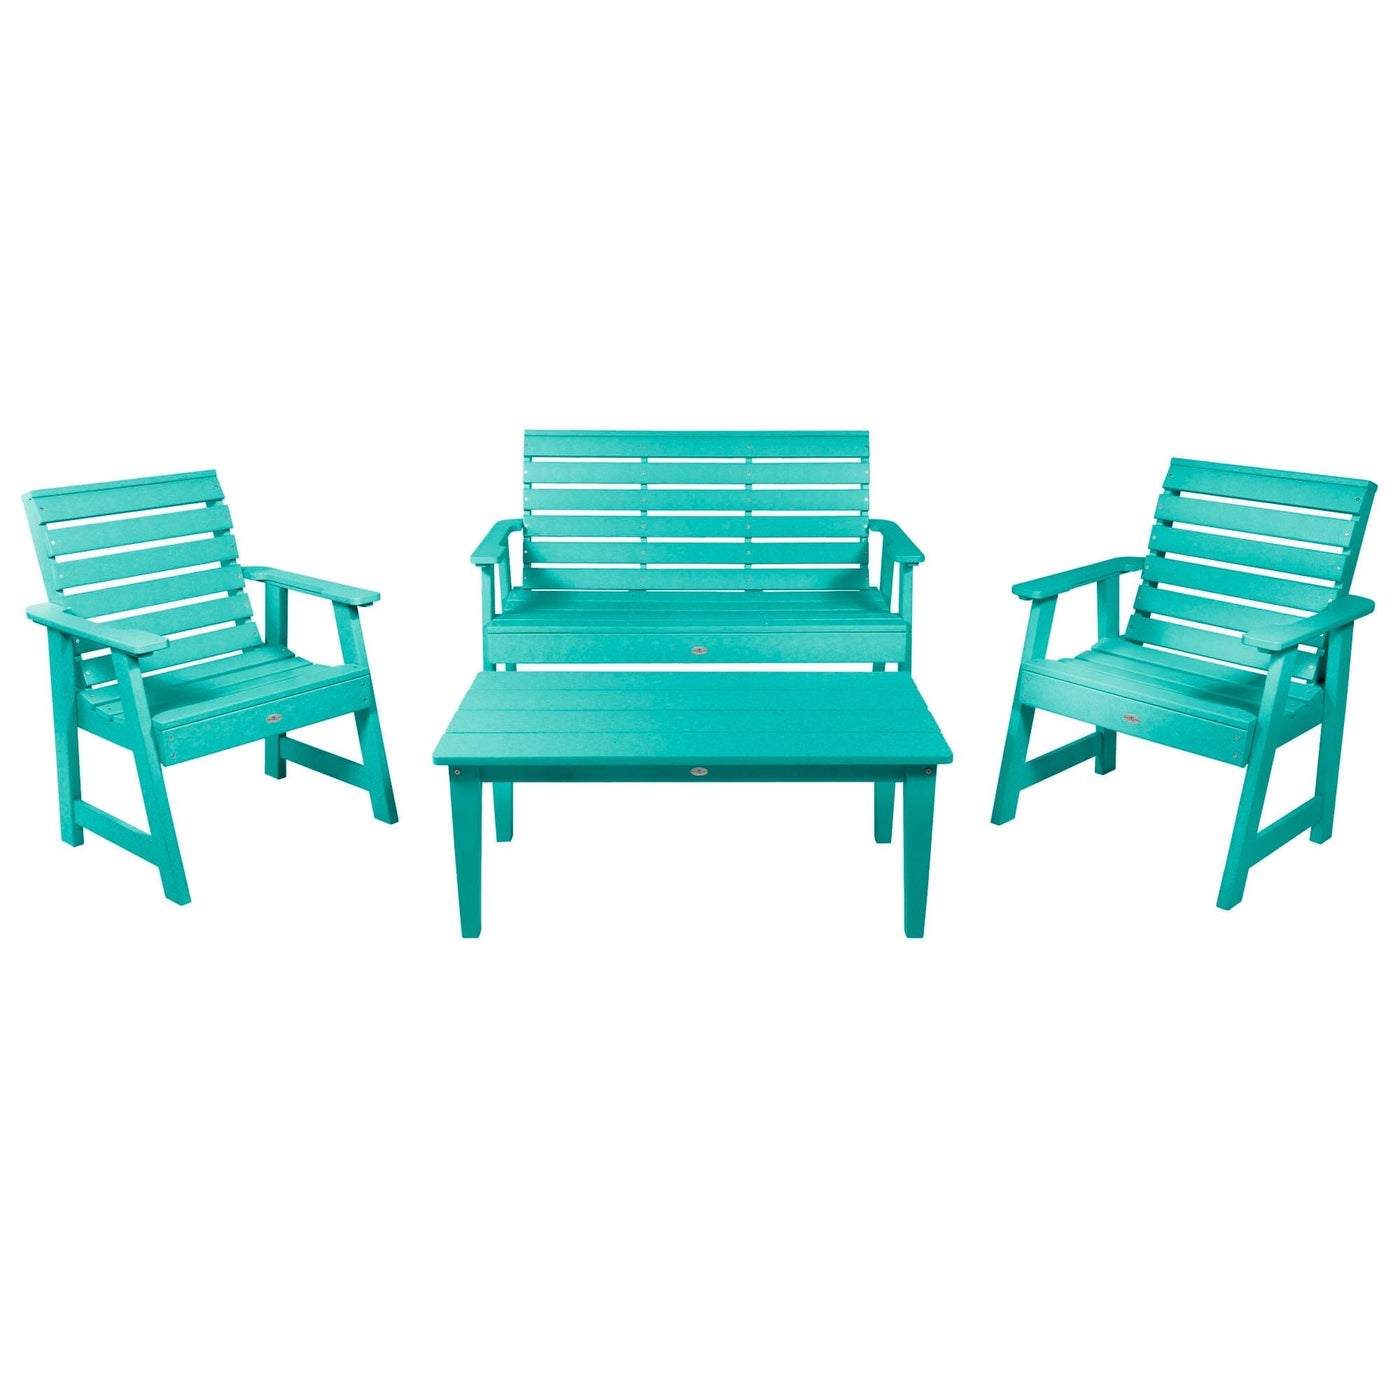 Riverside Garden Bench 4ft, 2 Garden Chairs, and Conversation Table Set Kitted Set Bahia Verde Outdoors Seaglass Blue 